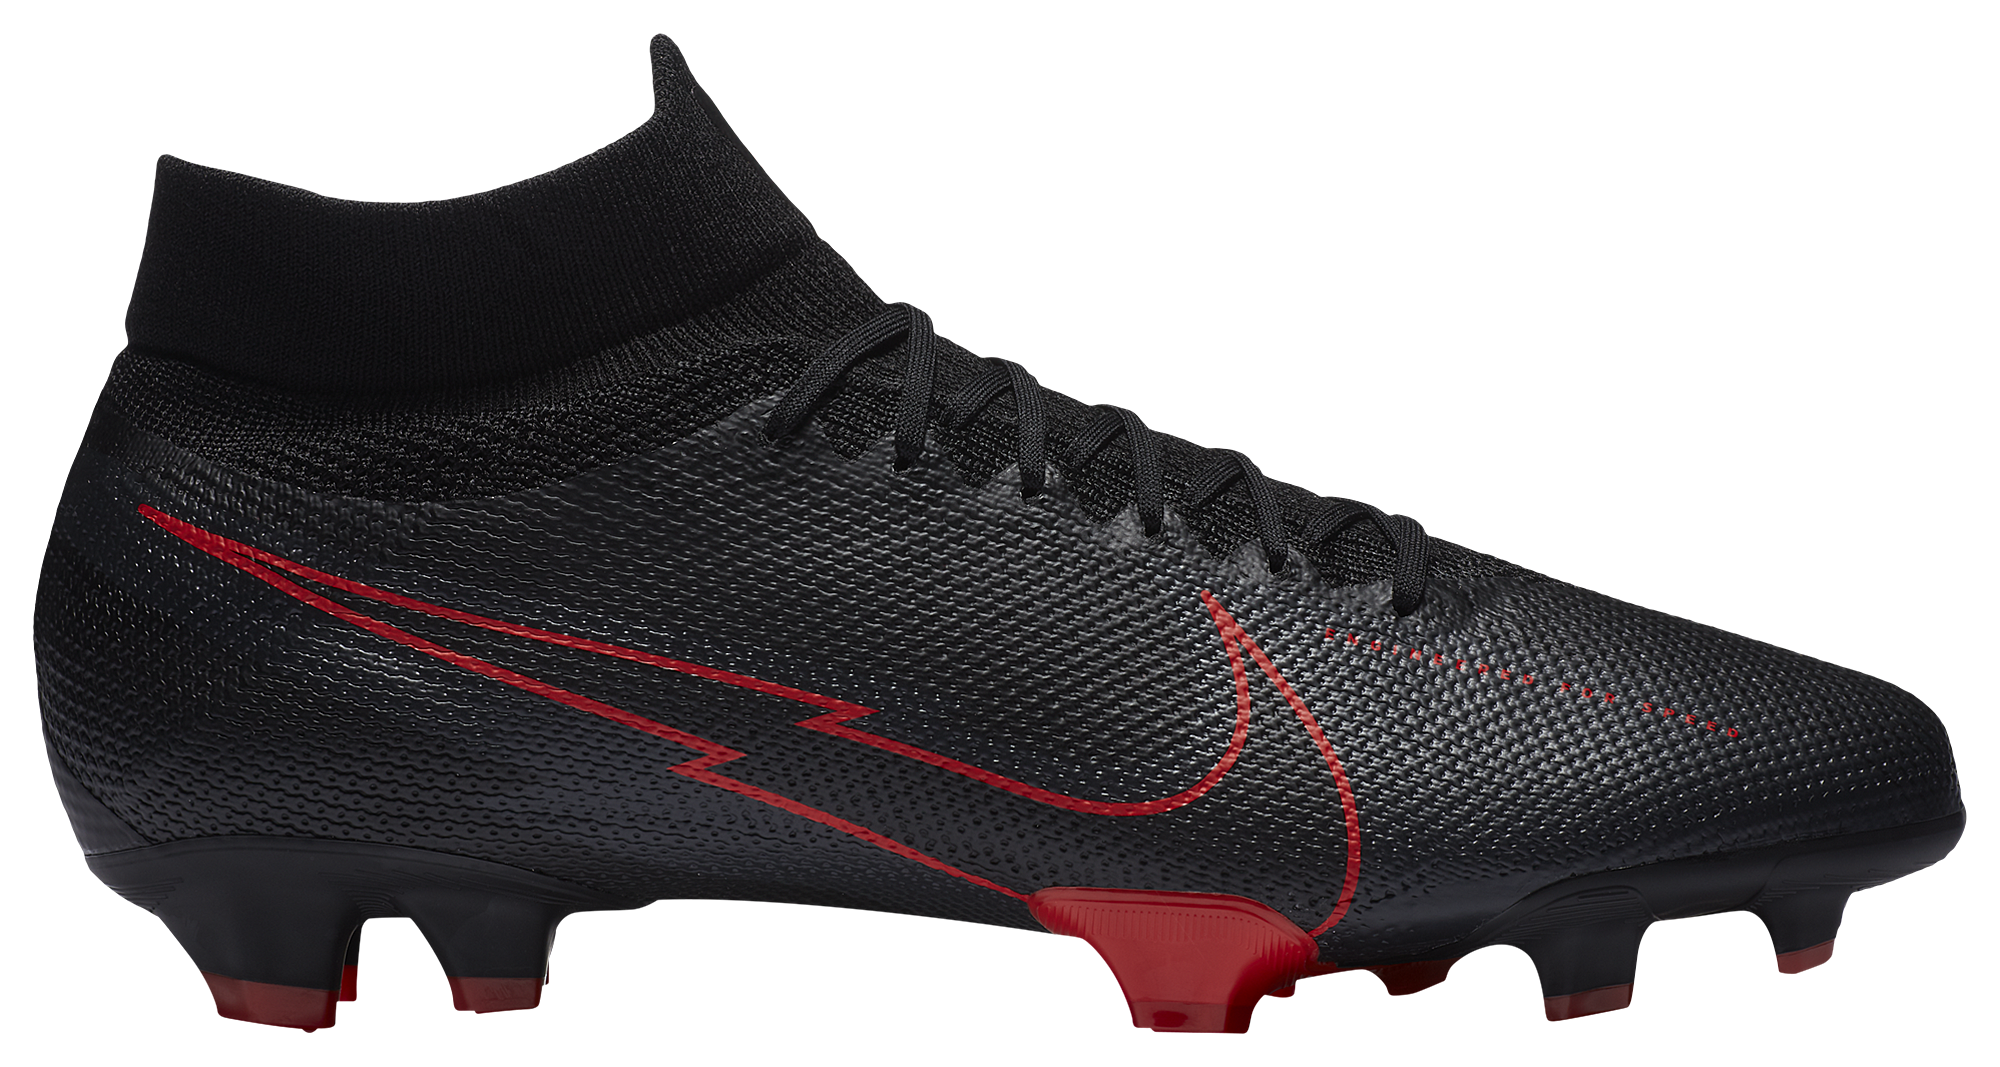 red nike mercurial soccer cleats